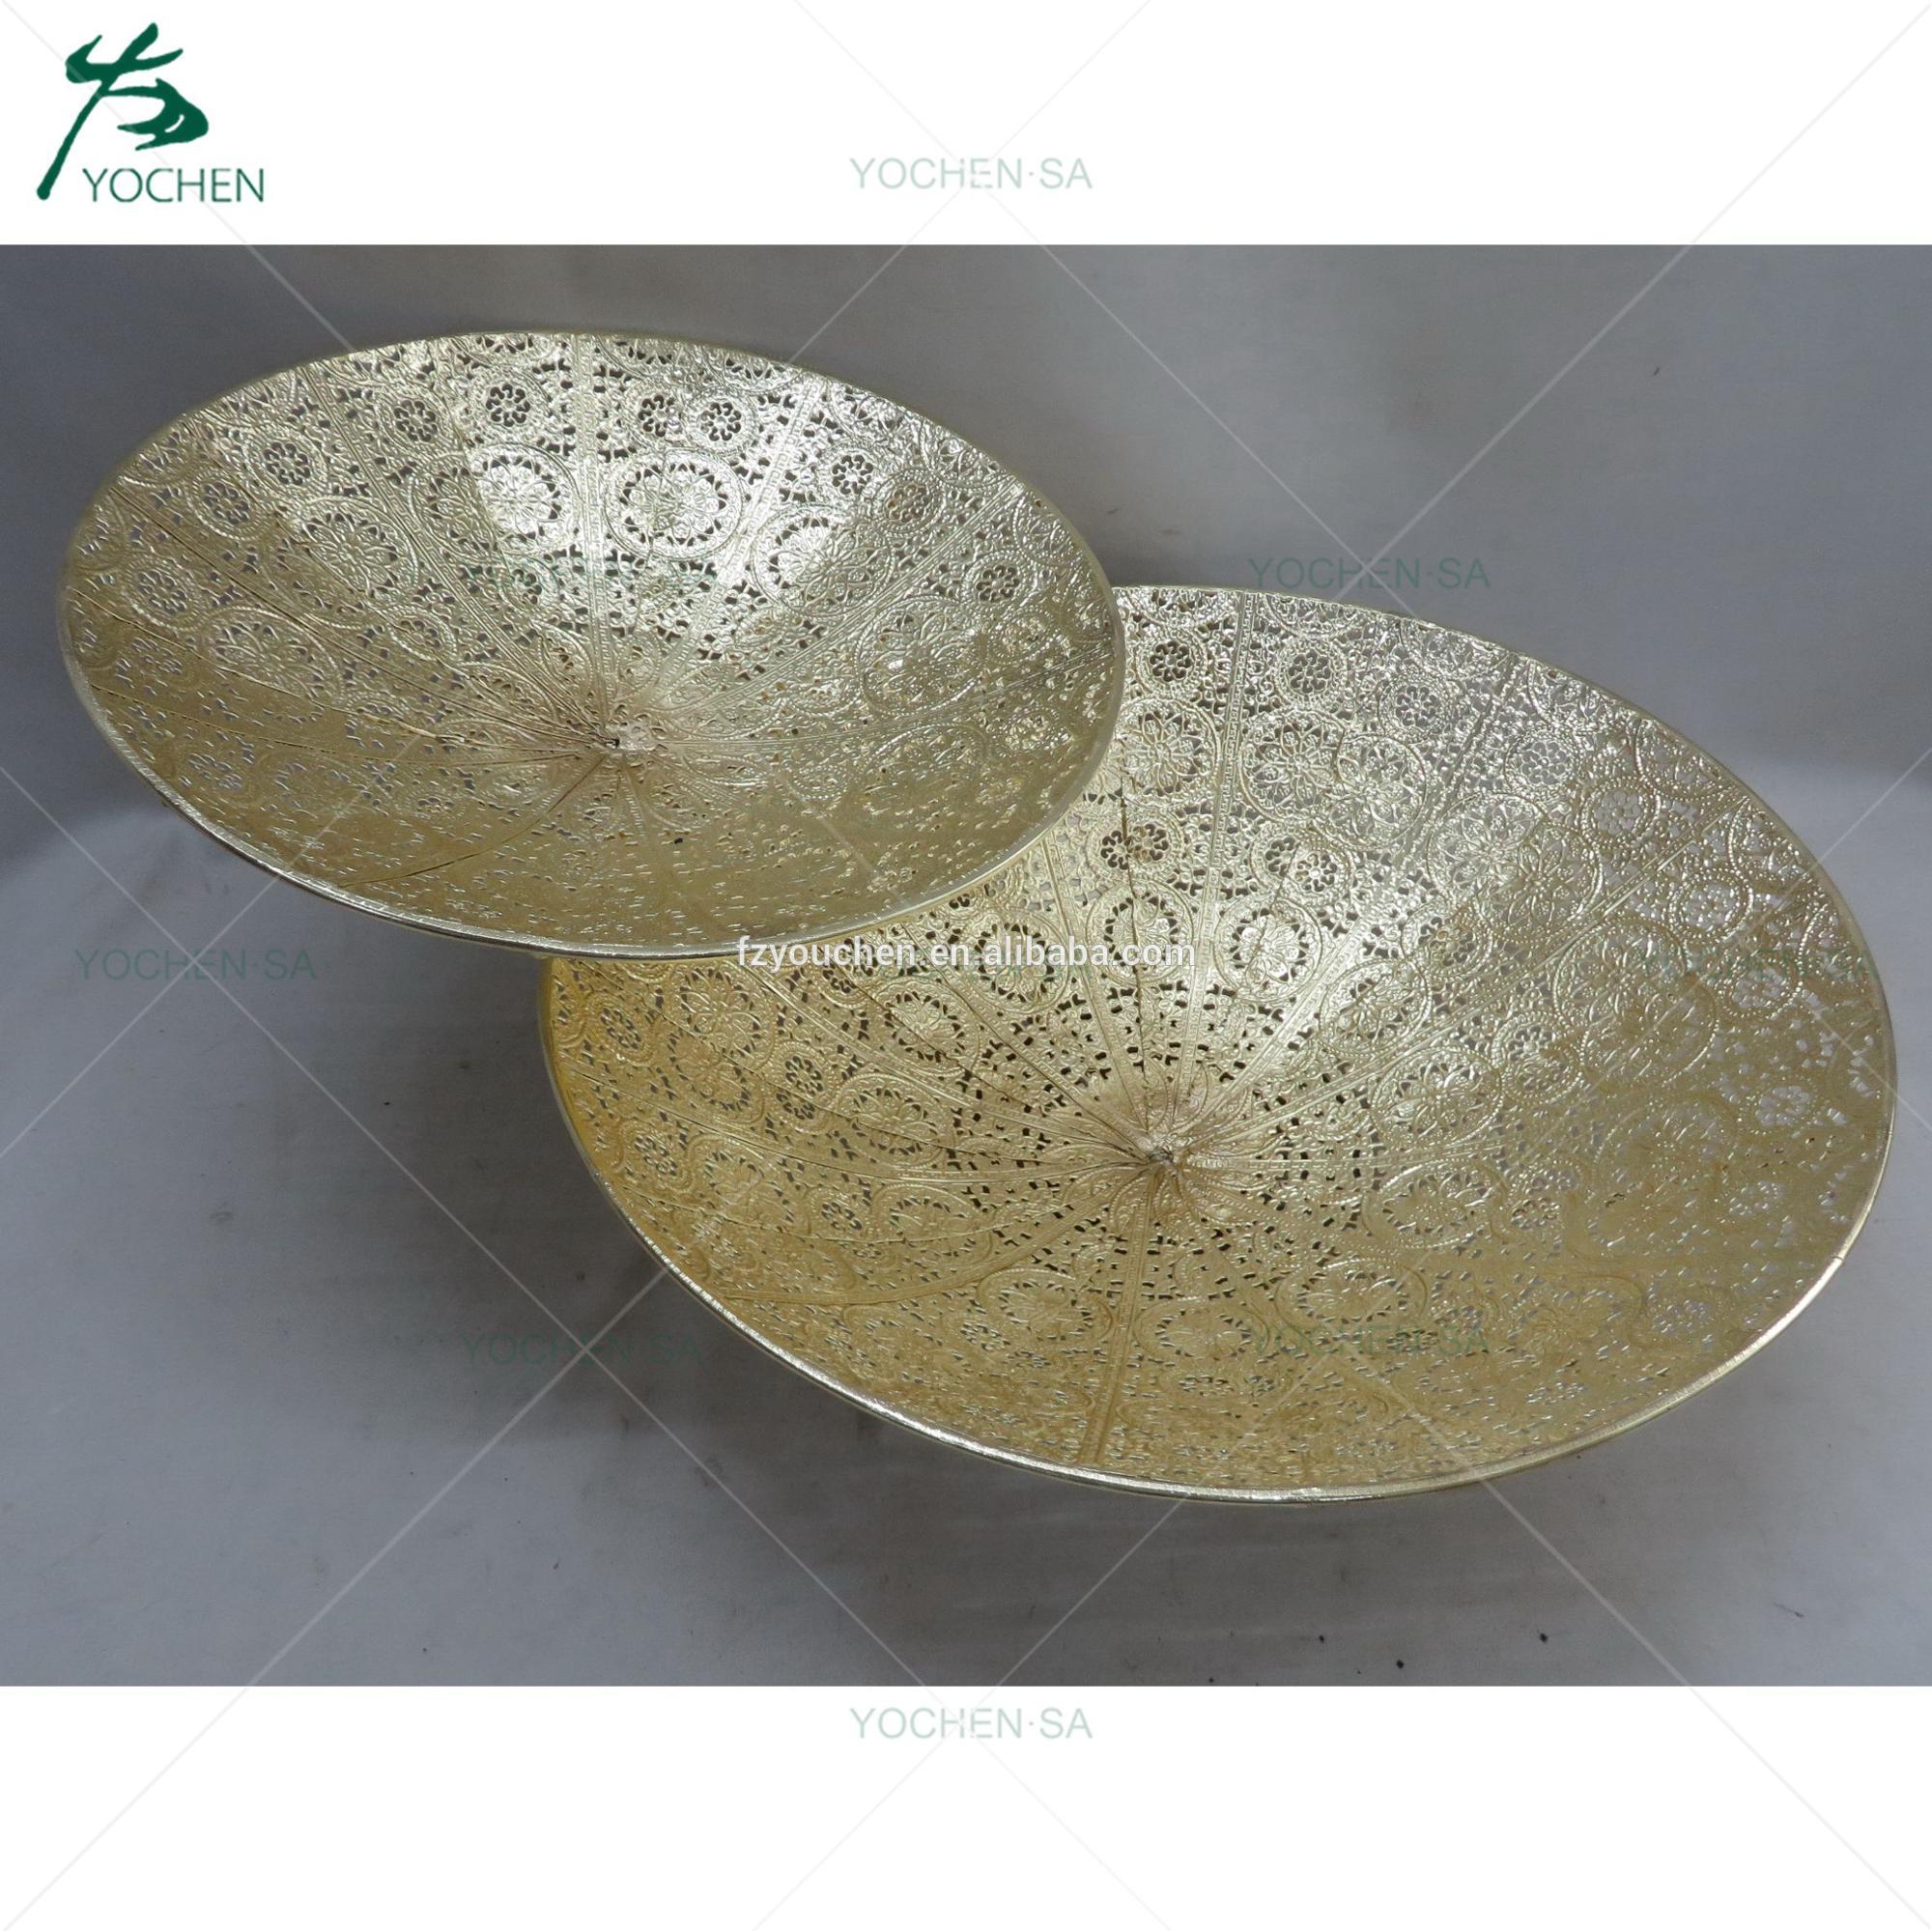 Decorative Vintage Gold Hammered Metal Candle Plate Display Tray